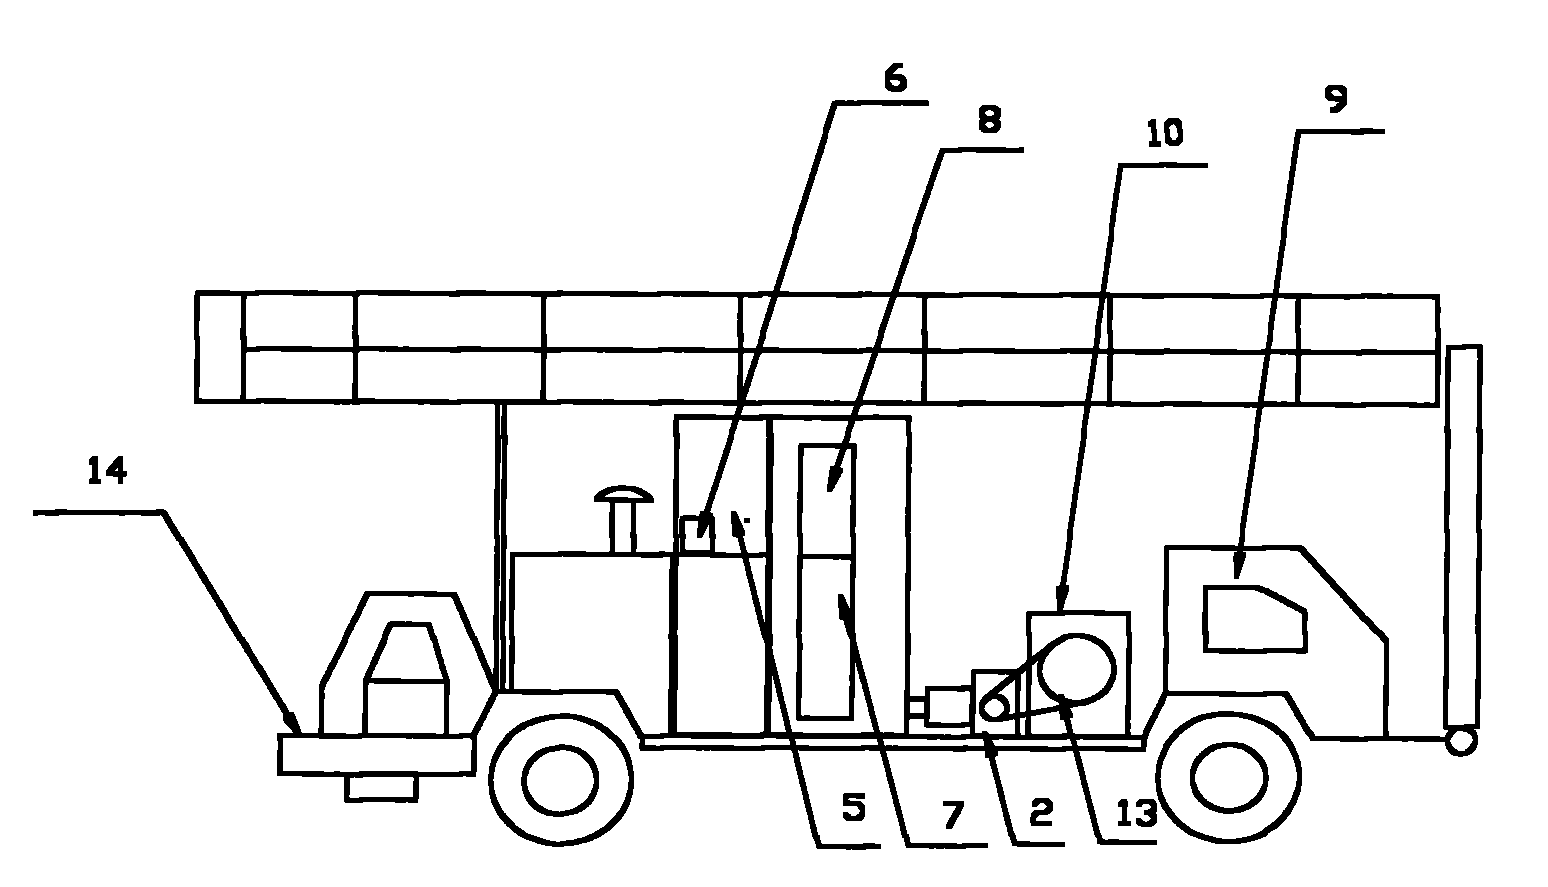 Oil/electric integrated power wheel-type workover rig